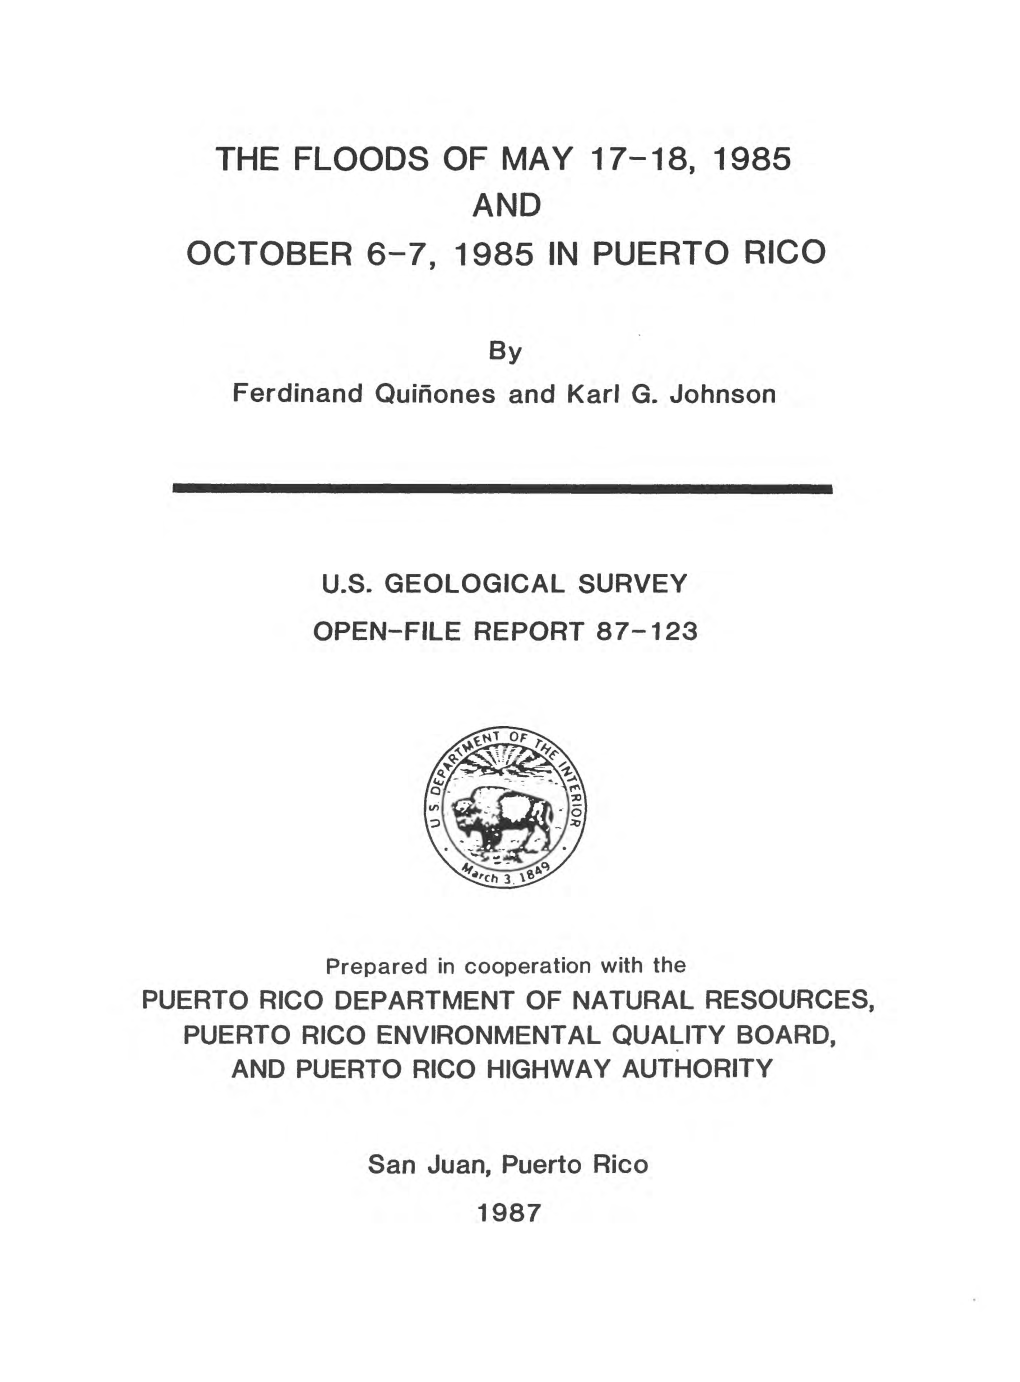 The Floods of May 17-18, 1985 and October 6-7, 1985 in Puerto Rico